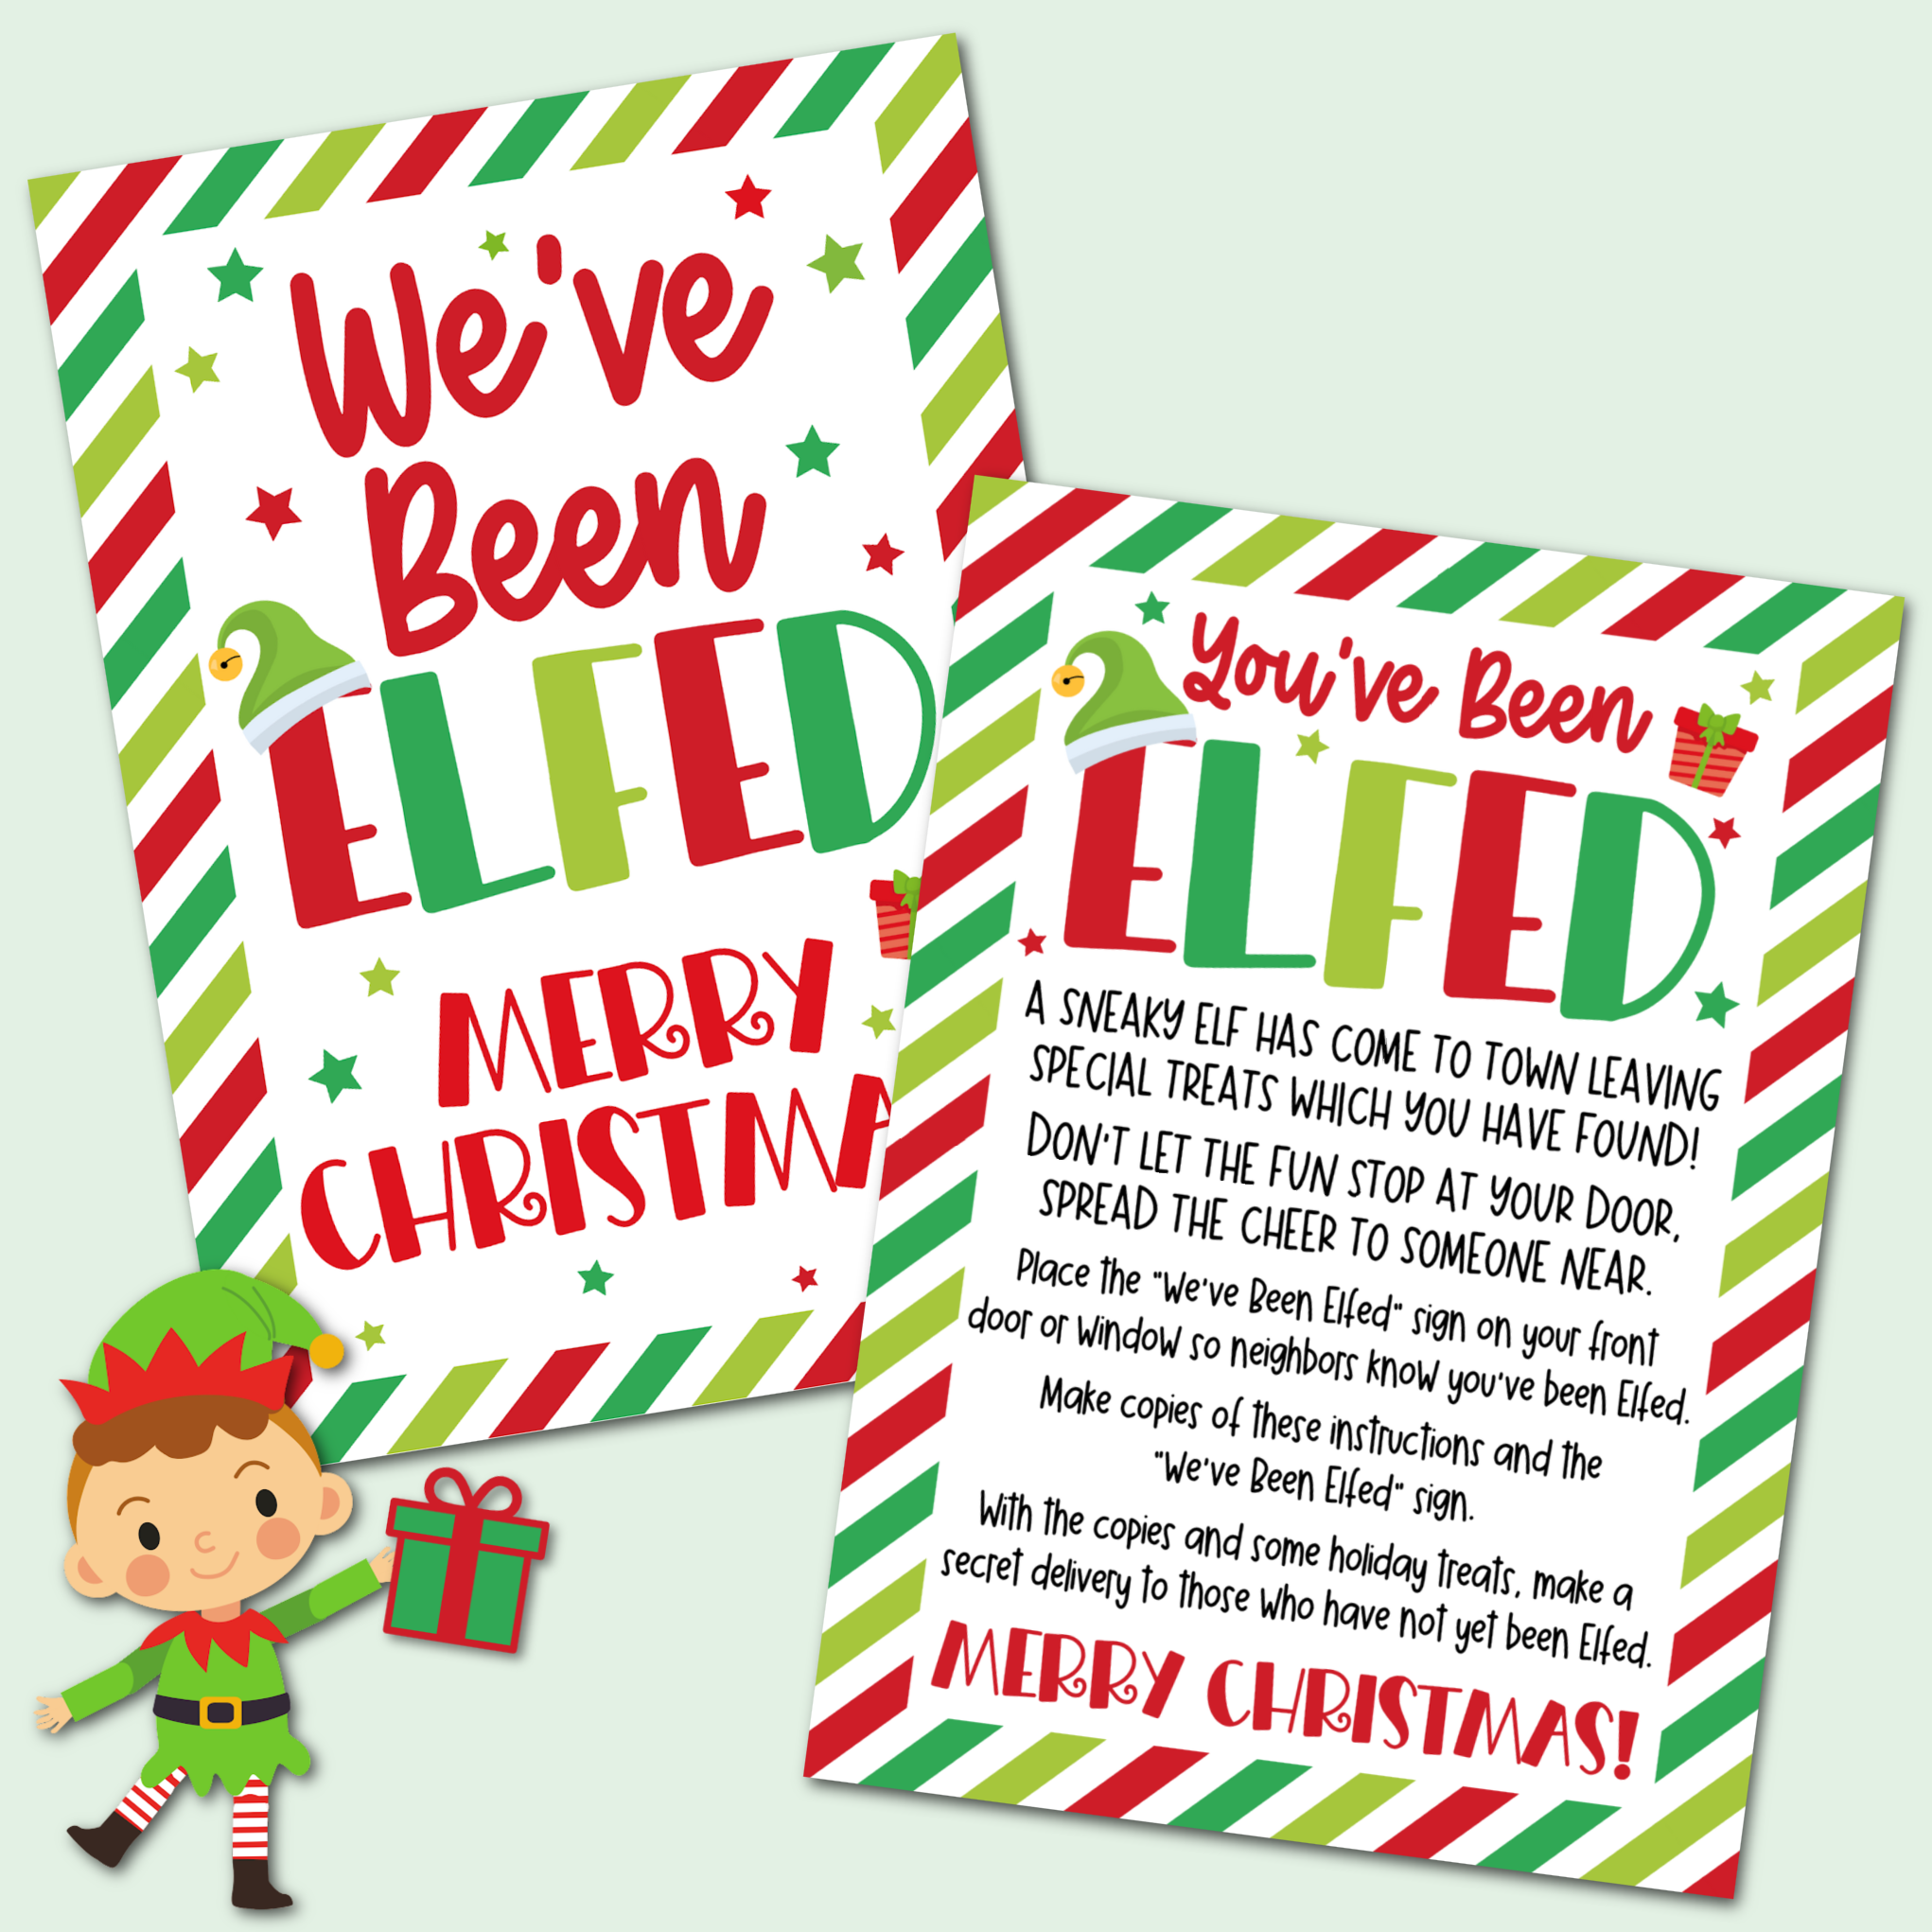 You've Been Elfed Printable